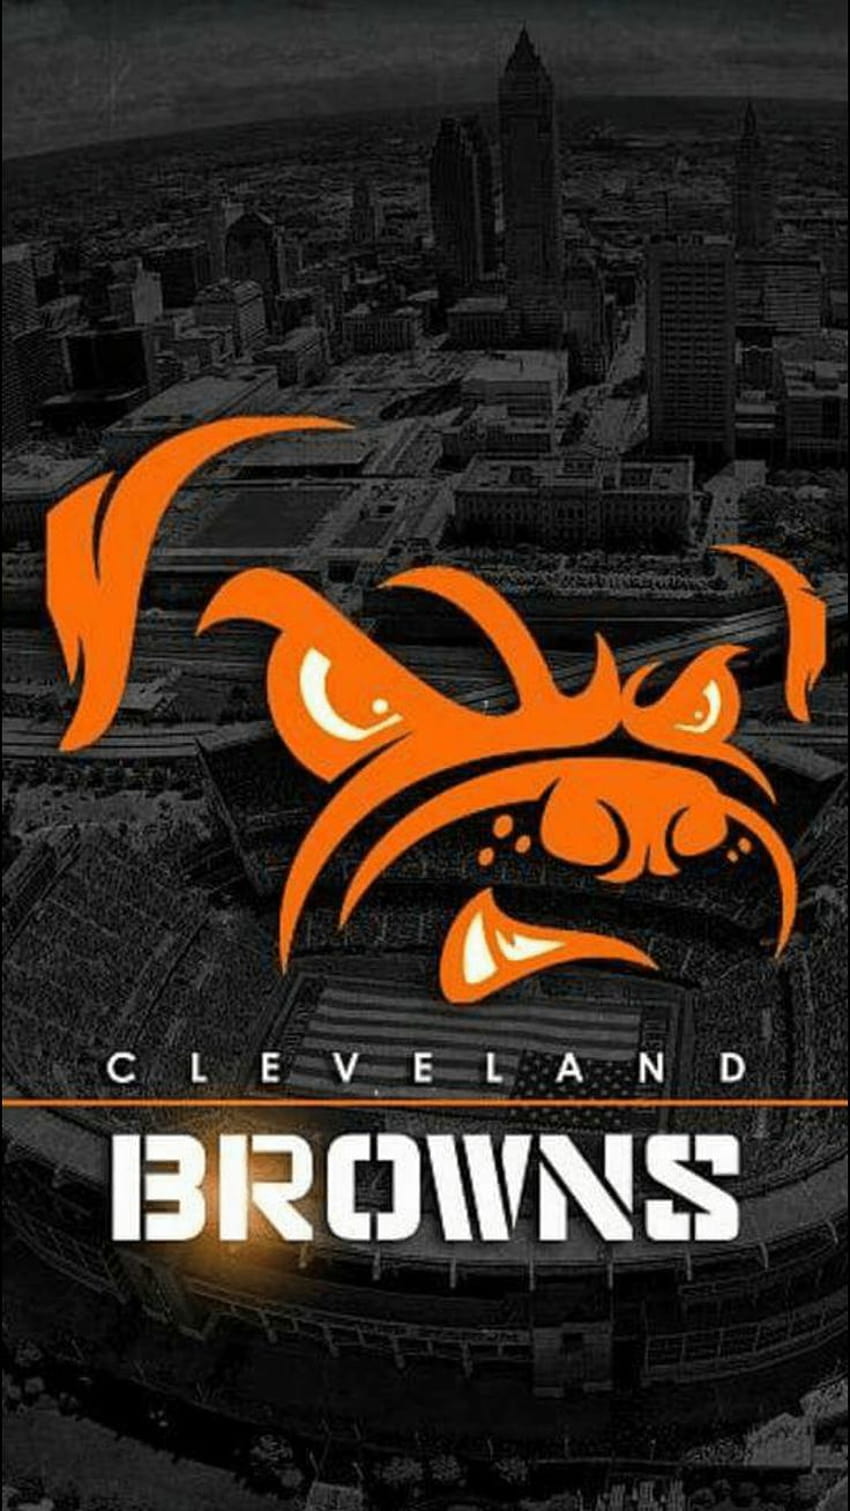 Cleveland Browns for mobile phone, tablet, computer and other dev… in 2021, football browns logo HD phone wallpaper